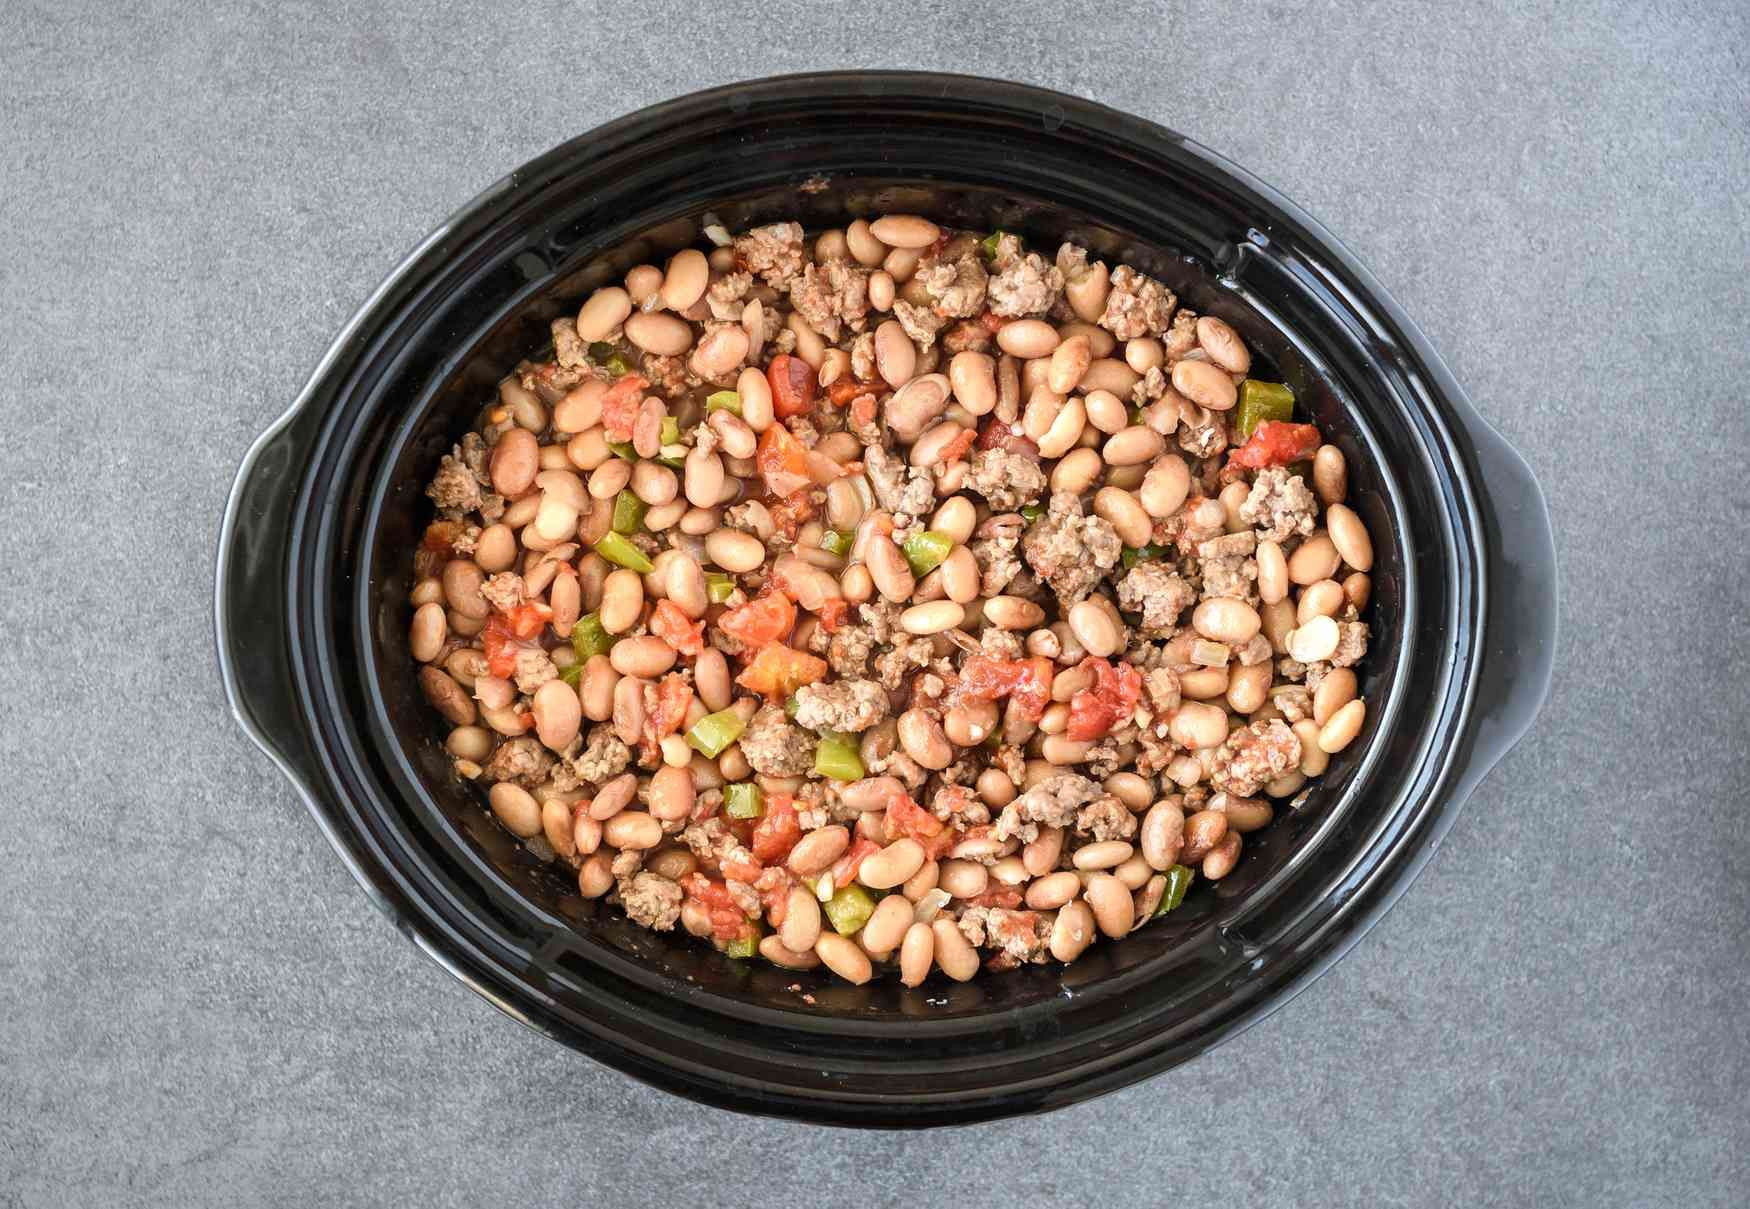 Pinto Beans And Ground Beef Recipe Slow Cooker
 Pin on Food